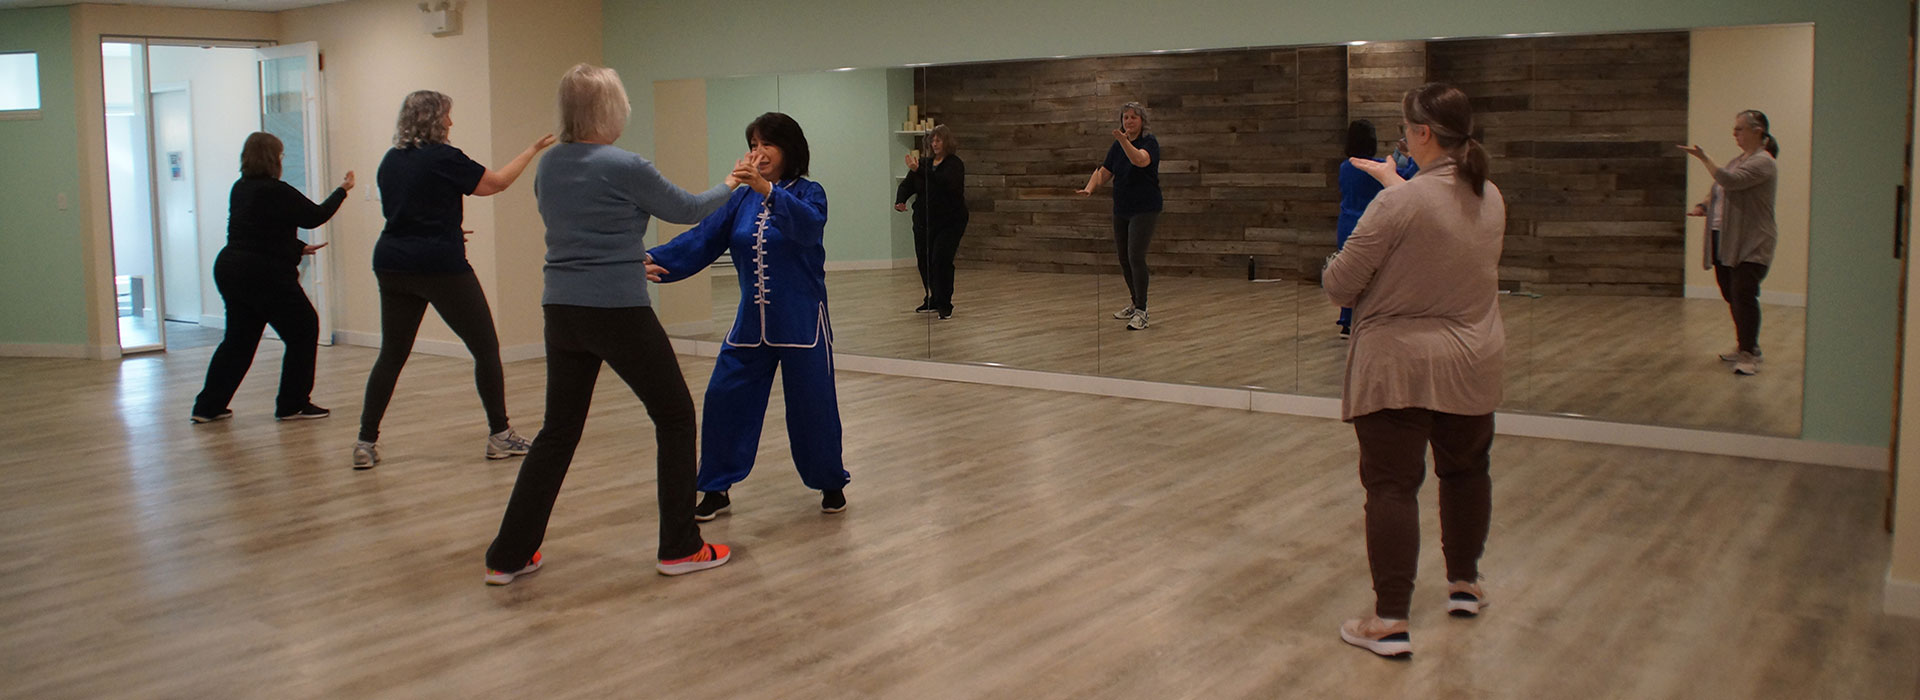 Whether in a park or in a building, learning Tai Chi is a wonderful way to spend your time with Sifu Peggy Lupaschuk in Airdrie.